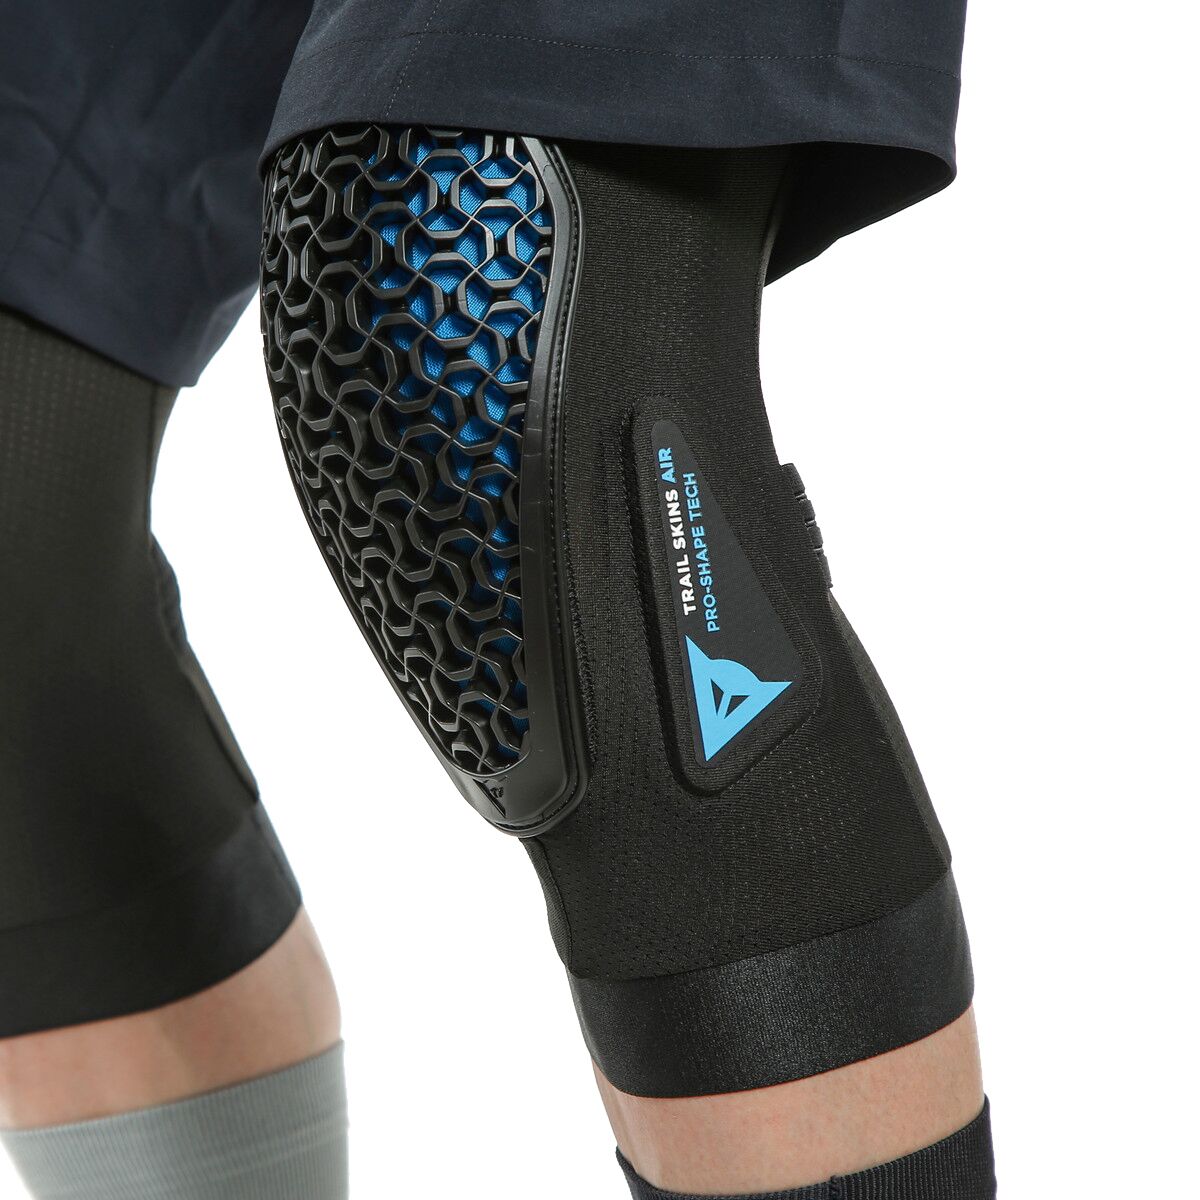 Dainese Knee v. Cyber Knee Protection. Air skin